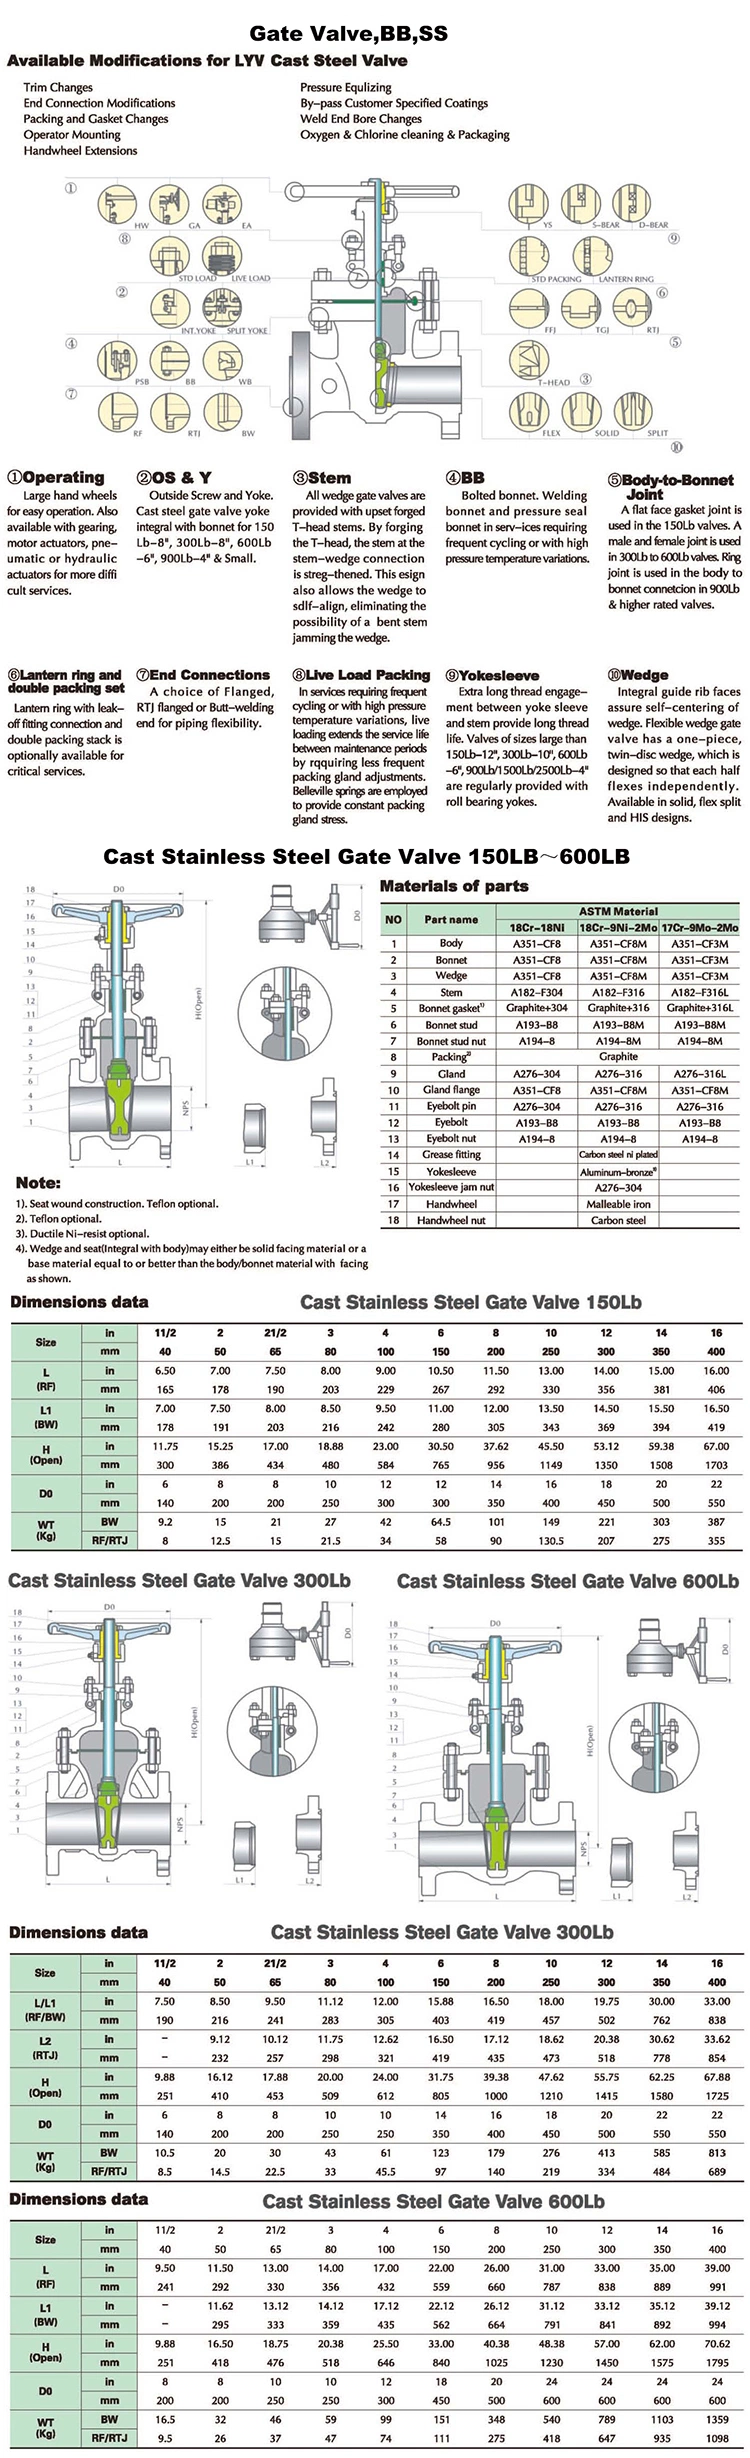 API600 Industrial Worm Gear Operated Flange OS and Y Wedge A216 Wcb Gate Valve with Prices